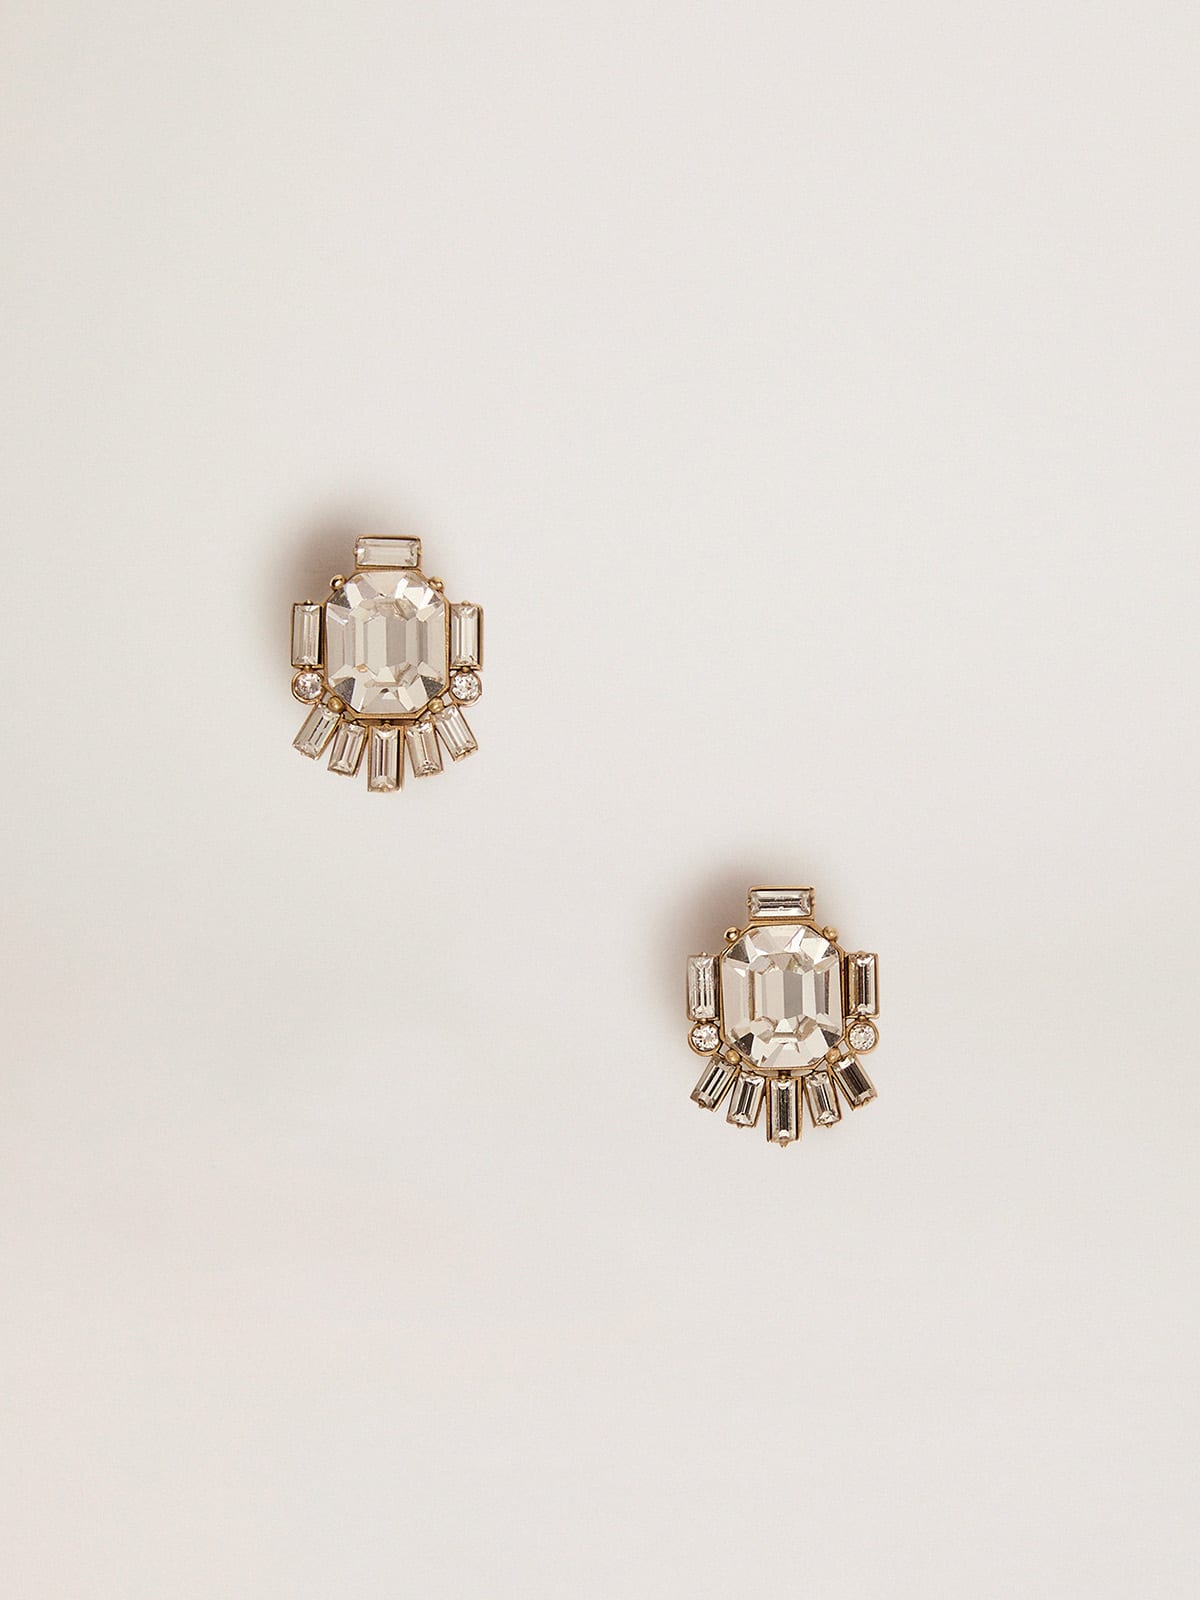 Golden Goose - Women's Déco stud earrings in old gold color with crystals in 